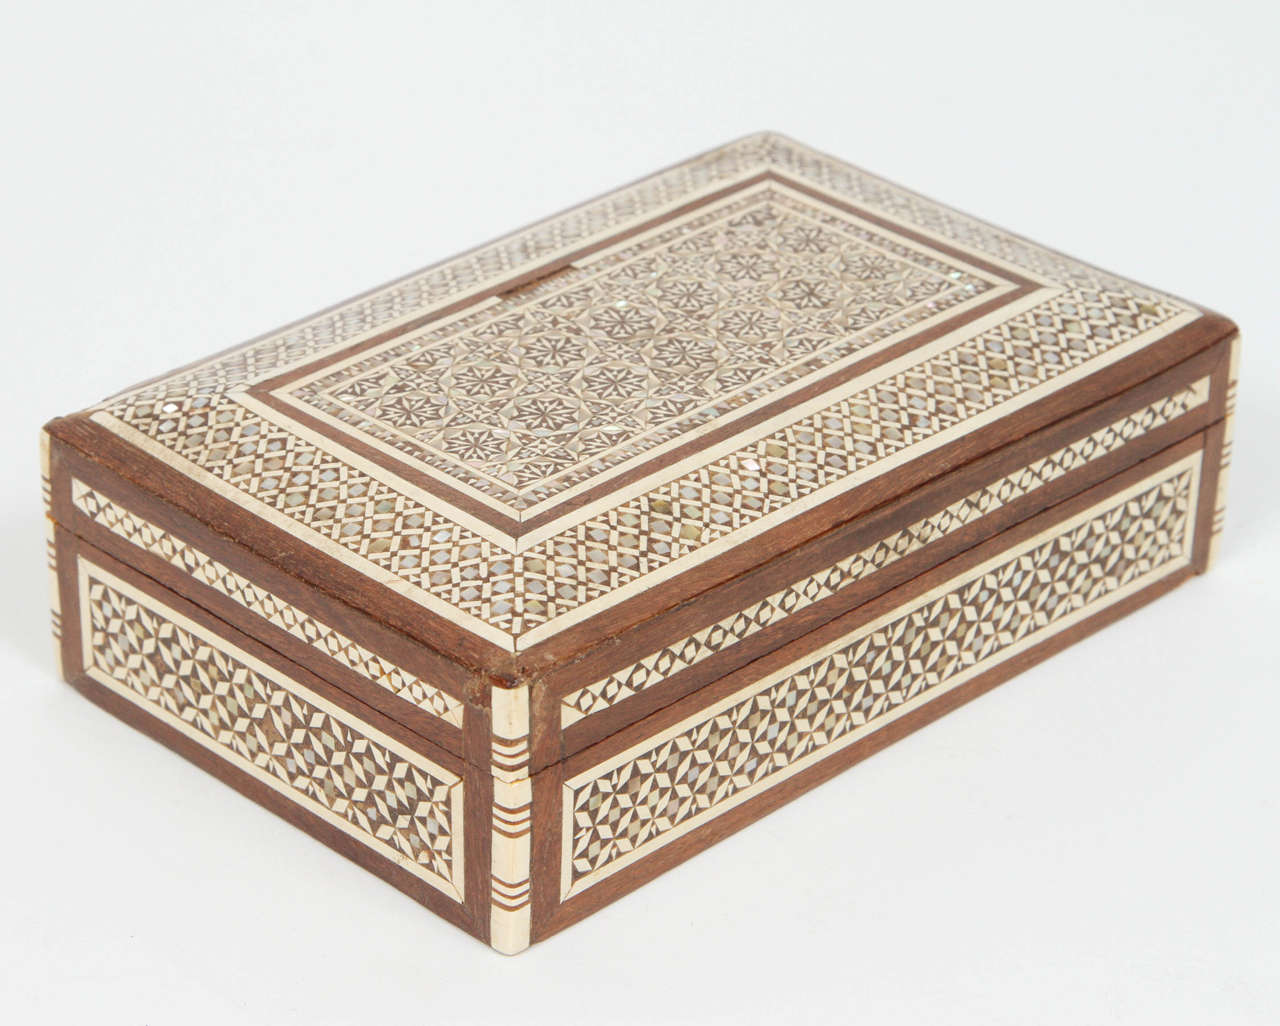 Antique Syrian box inlaid with mother of pearl, ivory and ebony.
Handcrafted very fine Moorish micro mosaic inlaid geometric marquetry artwork.
These Middle Eastern boxes are used to store cigarettes or card.
Museum piece like the one in Doris